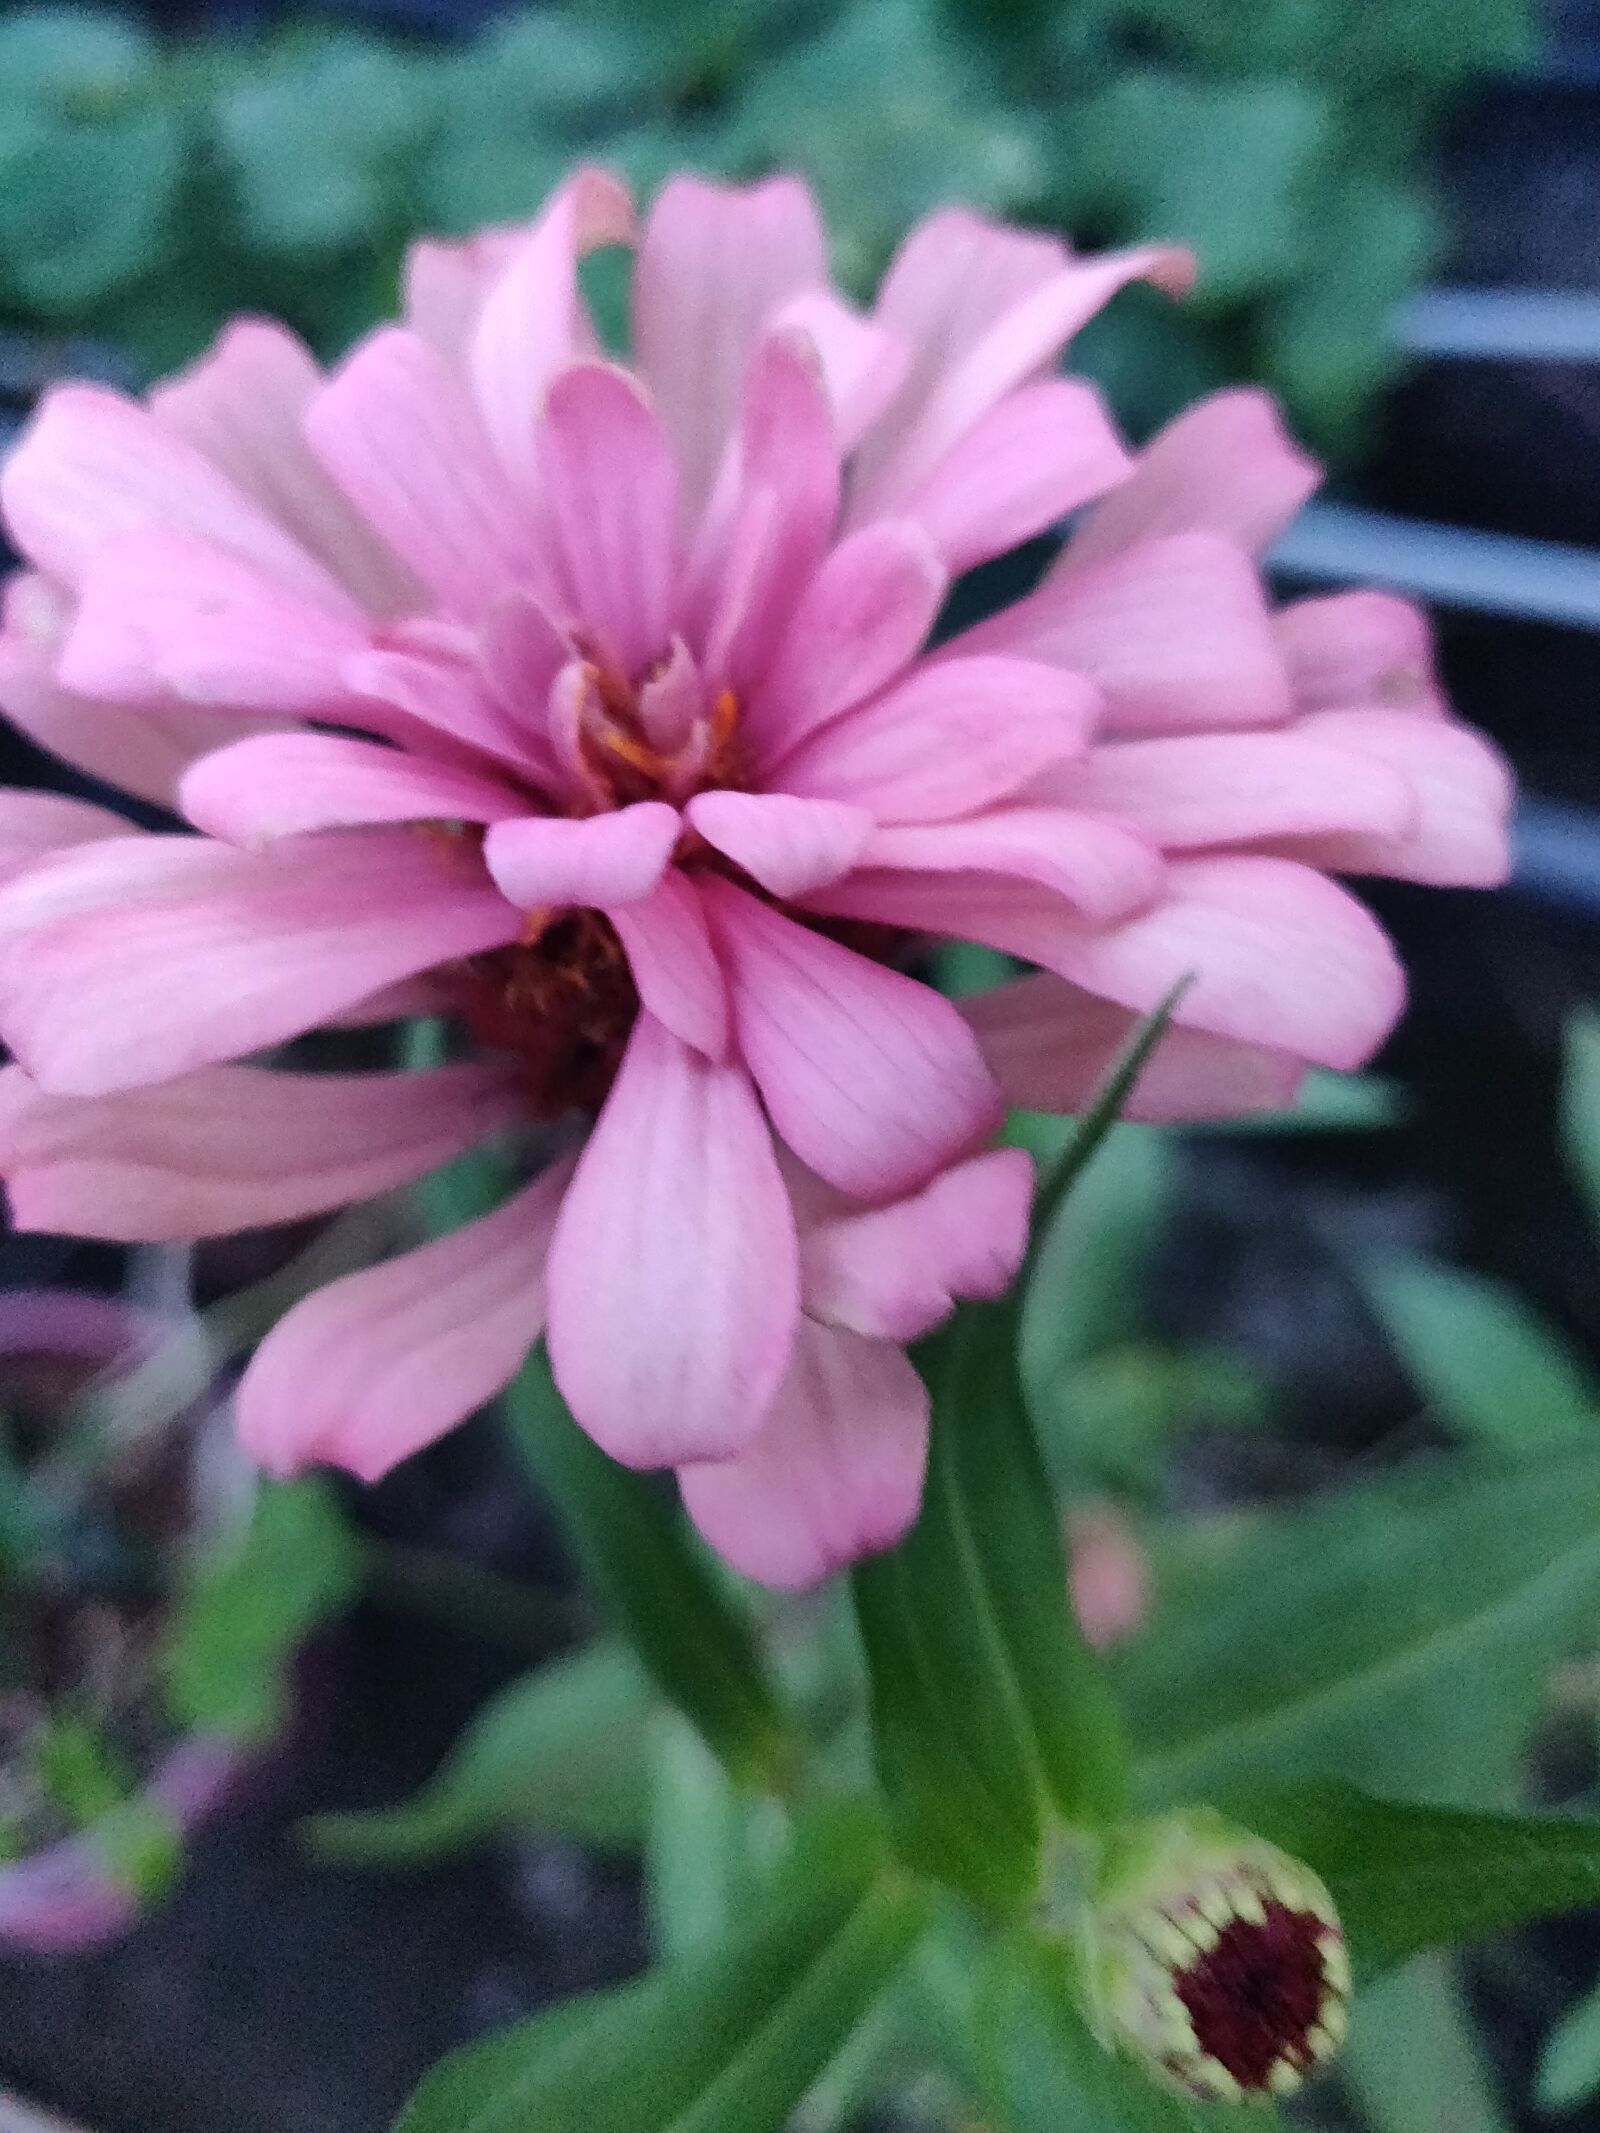 OnePlus A6010 sample photo. Flower, nature, pink photography